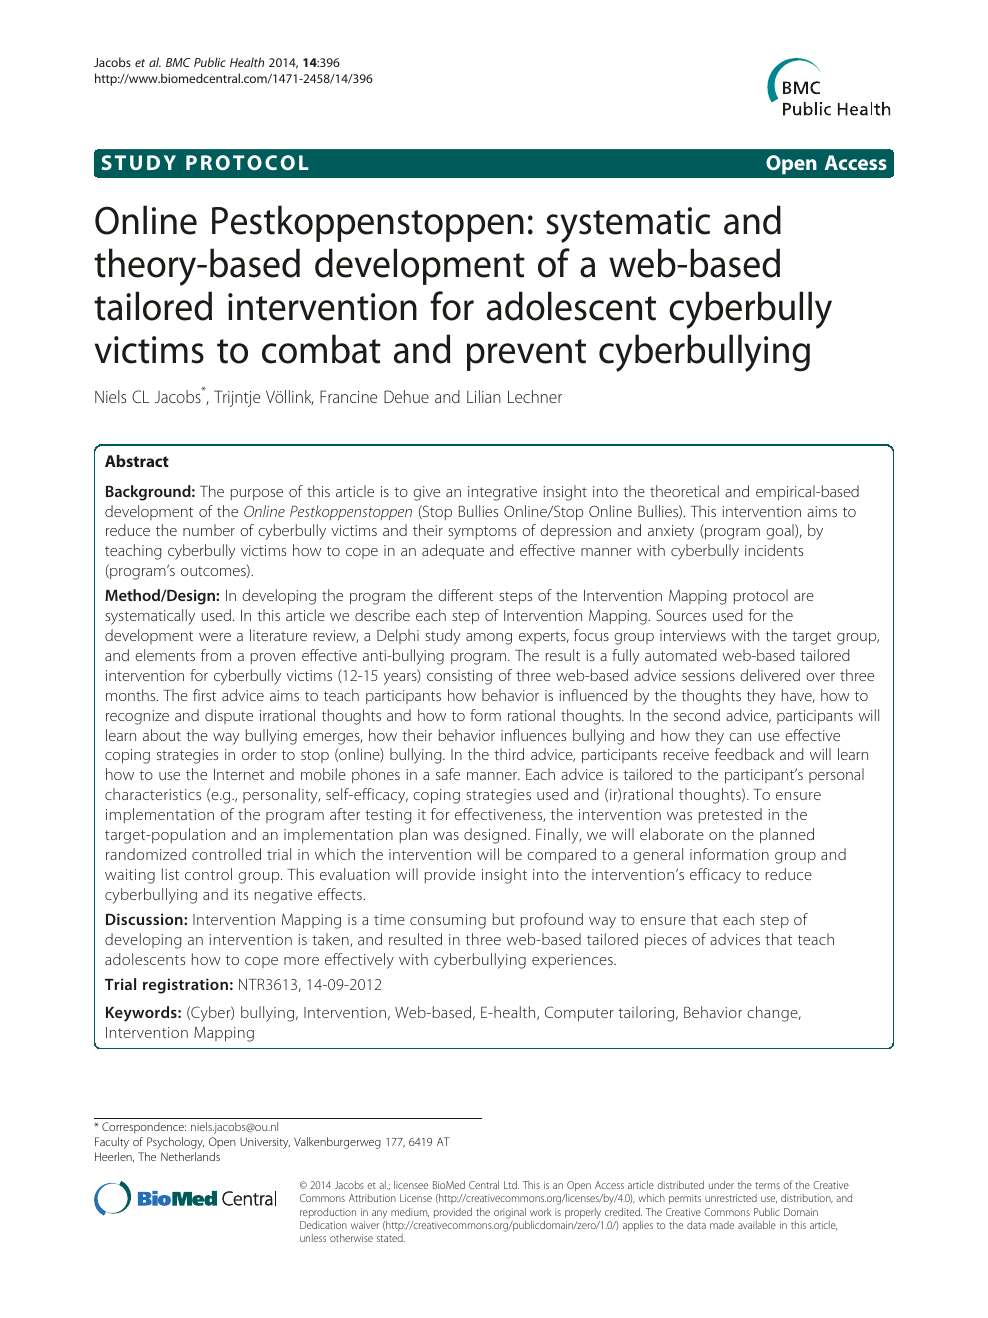 cyberbullying research paper chapter 3